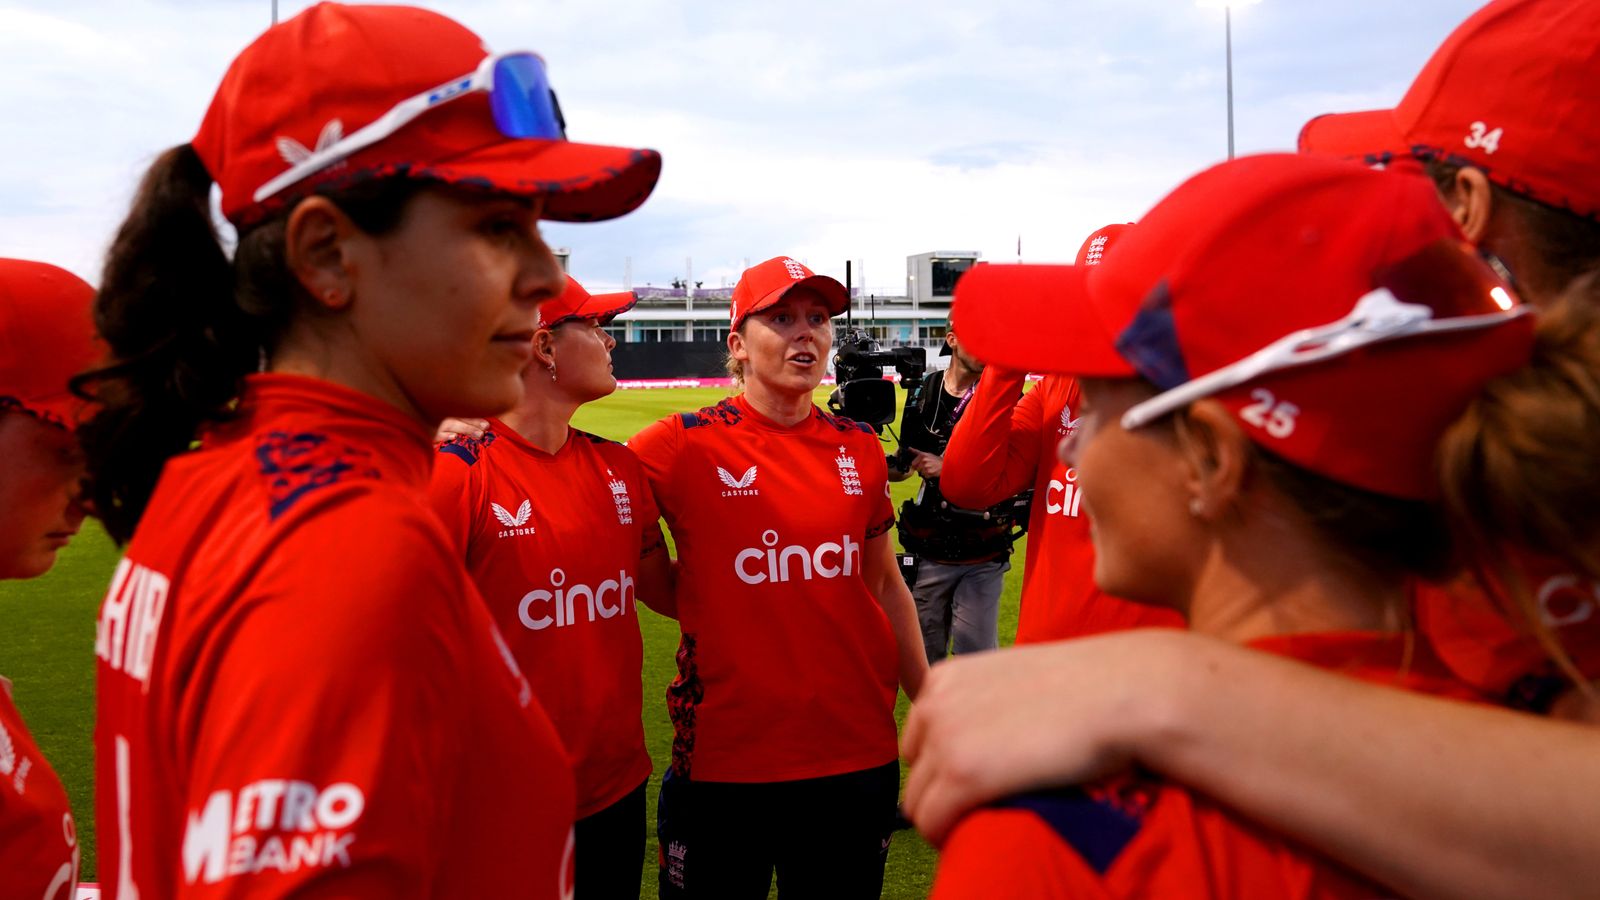 England vs Pakistan: Third women’s T20I at Headingley live text commentary and video clips | Cricket News